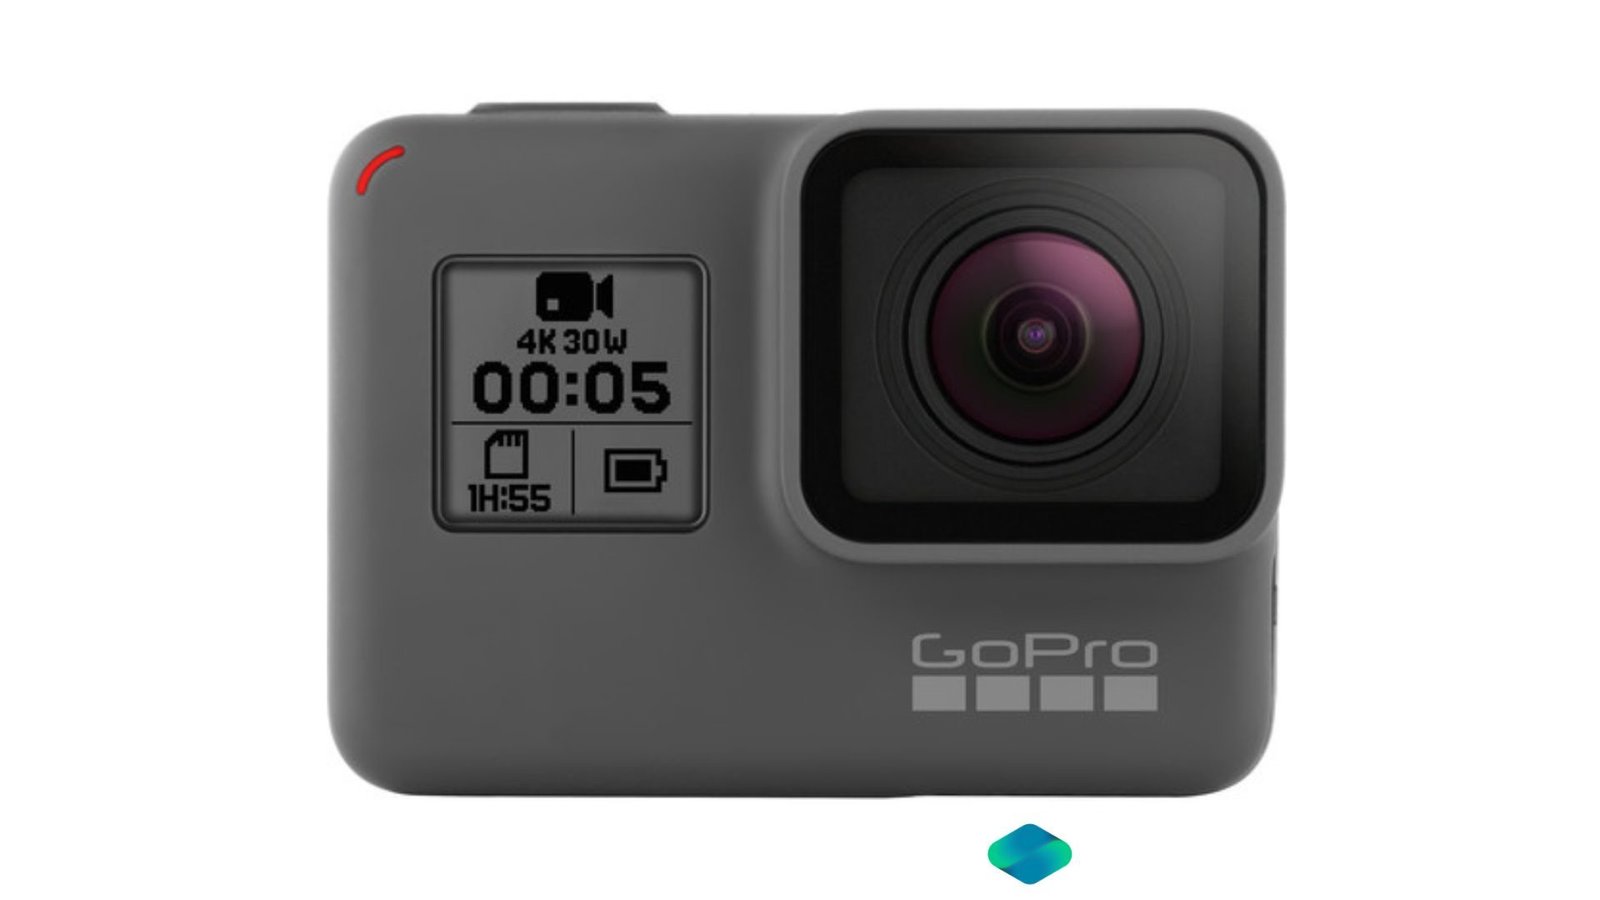 Rent GoPro Hero 5 Camera With All Accessories in Delhi NCR, Camera accessories, Camera lenses for rent, in Delhi Gurgaon Noida, hire Shooting equipment, Lighting equipment rental, Film gear rental for Video production, camera rental company in Delhi, film equipment rental company